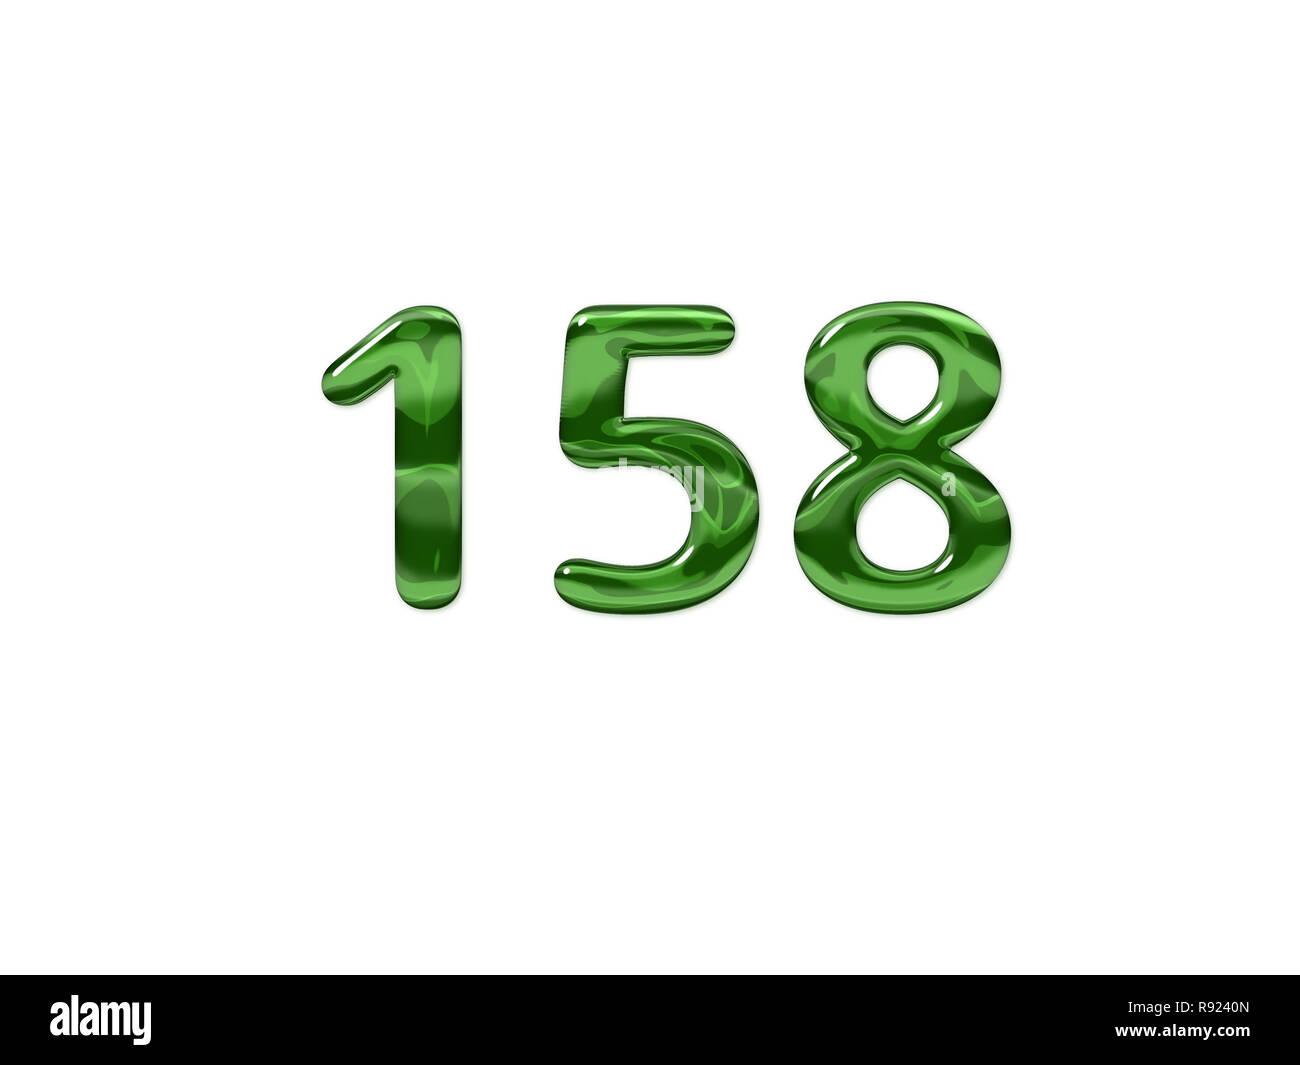 Green Number 158 isolated white background Stock Photo